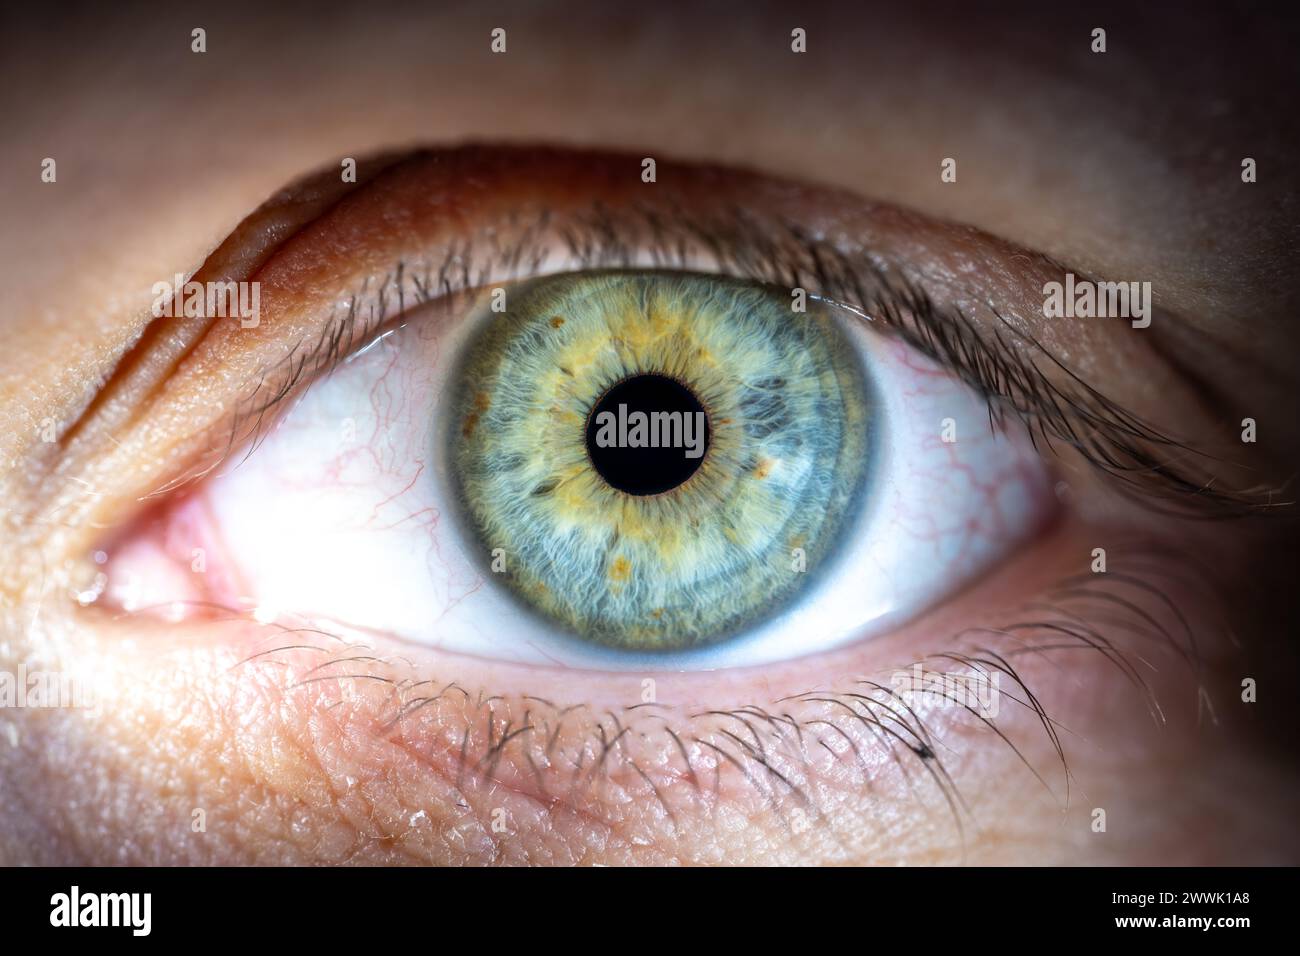 Description: Female Blue-Green Colored Eye with brown pigment spots. Pupil Closed. Close Up. Structural Anatomy. Human Iris Macro Detail. Stock Photo